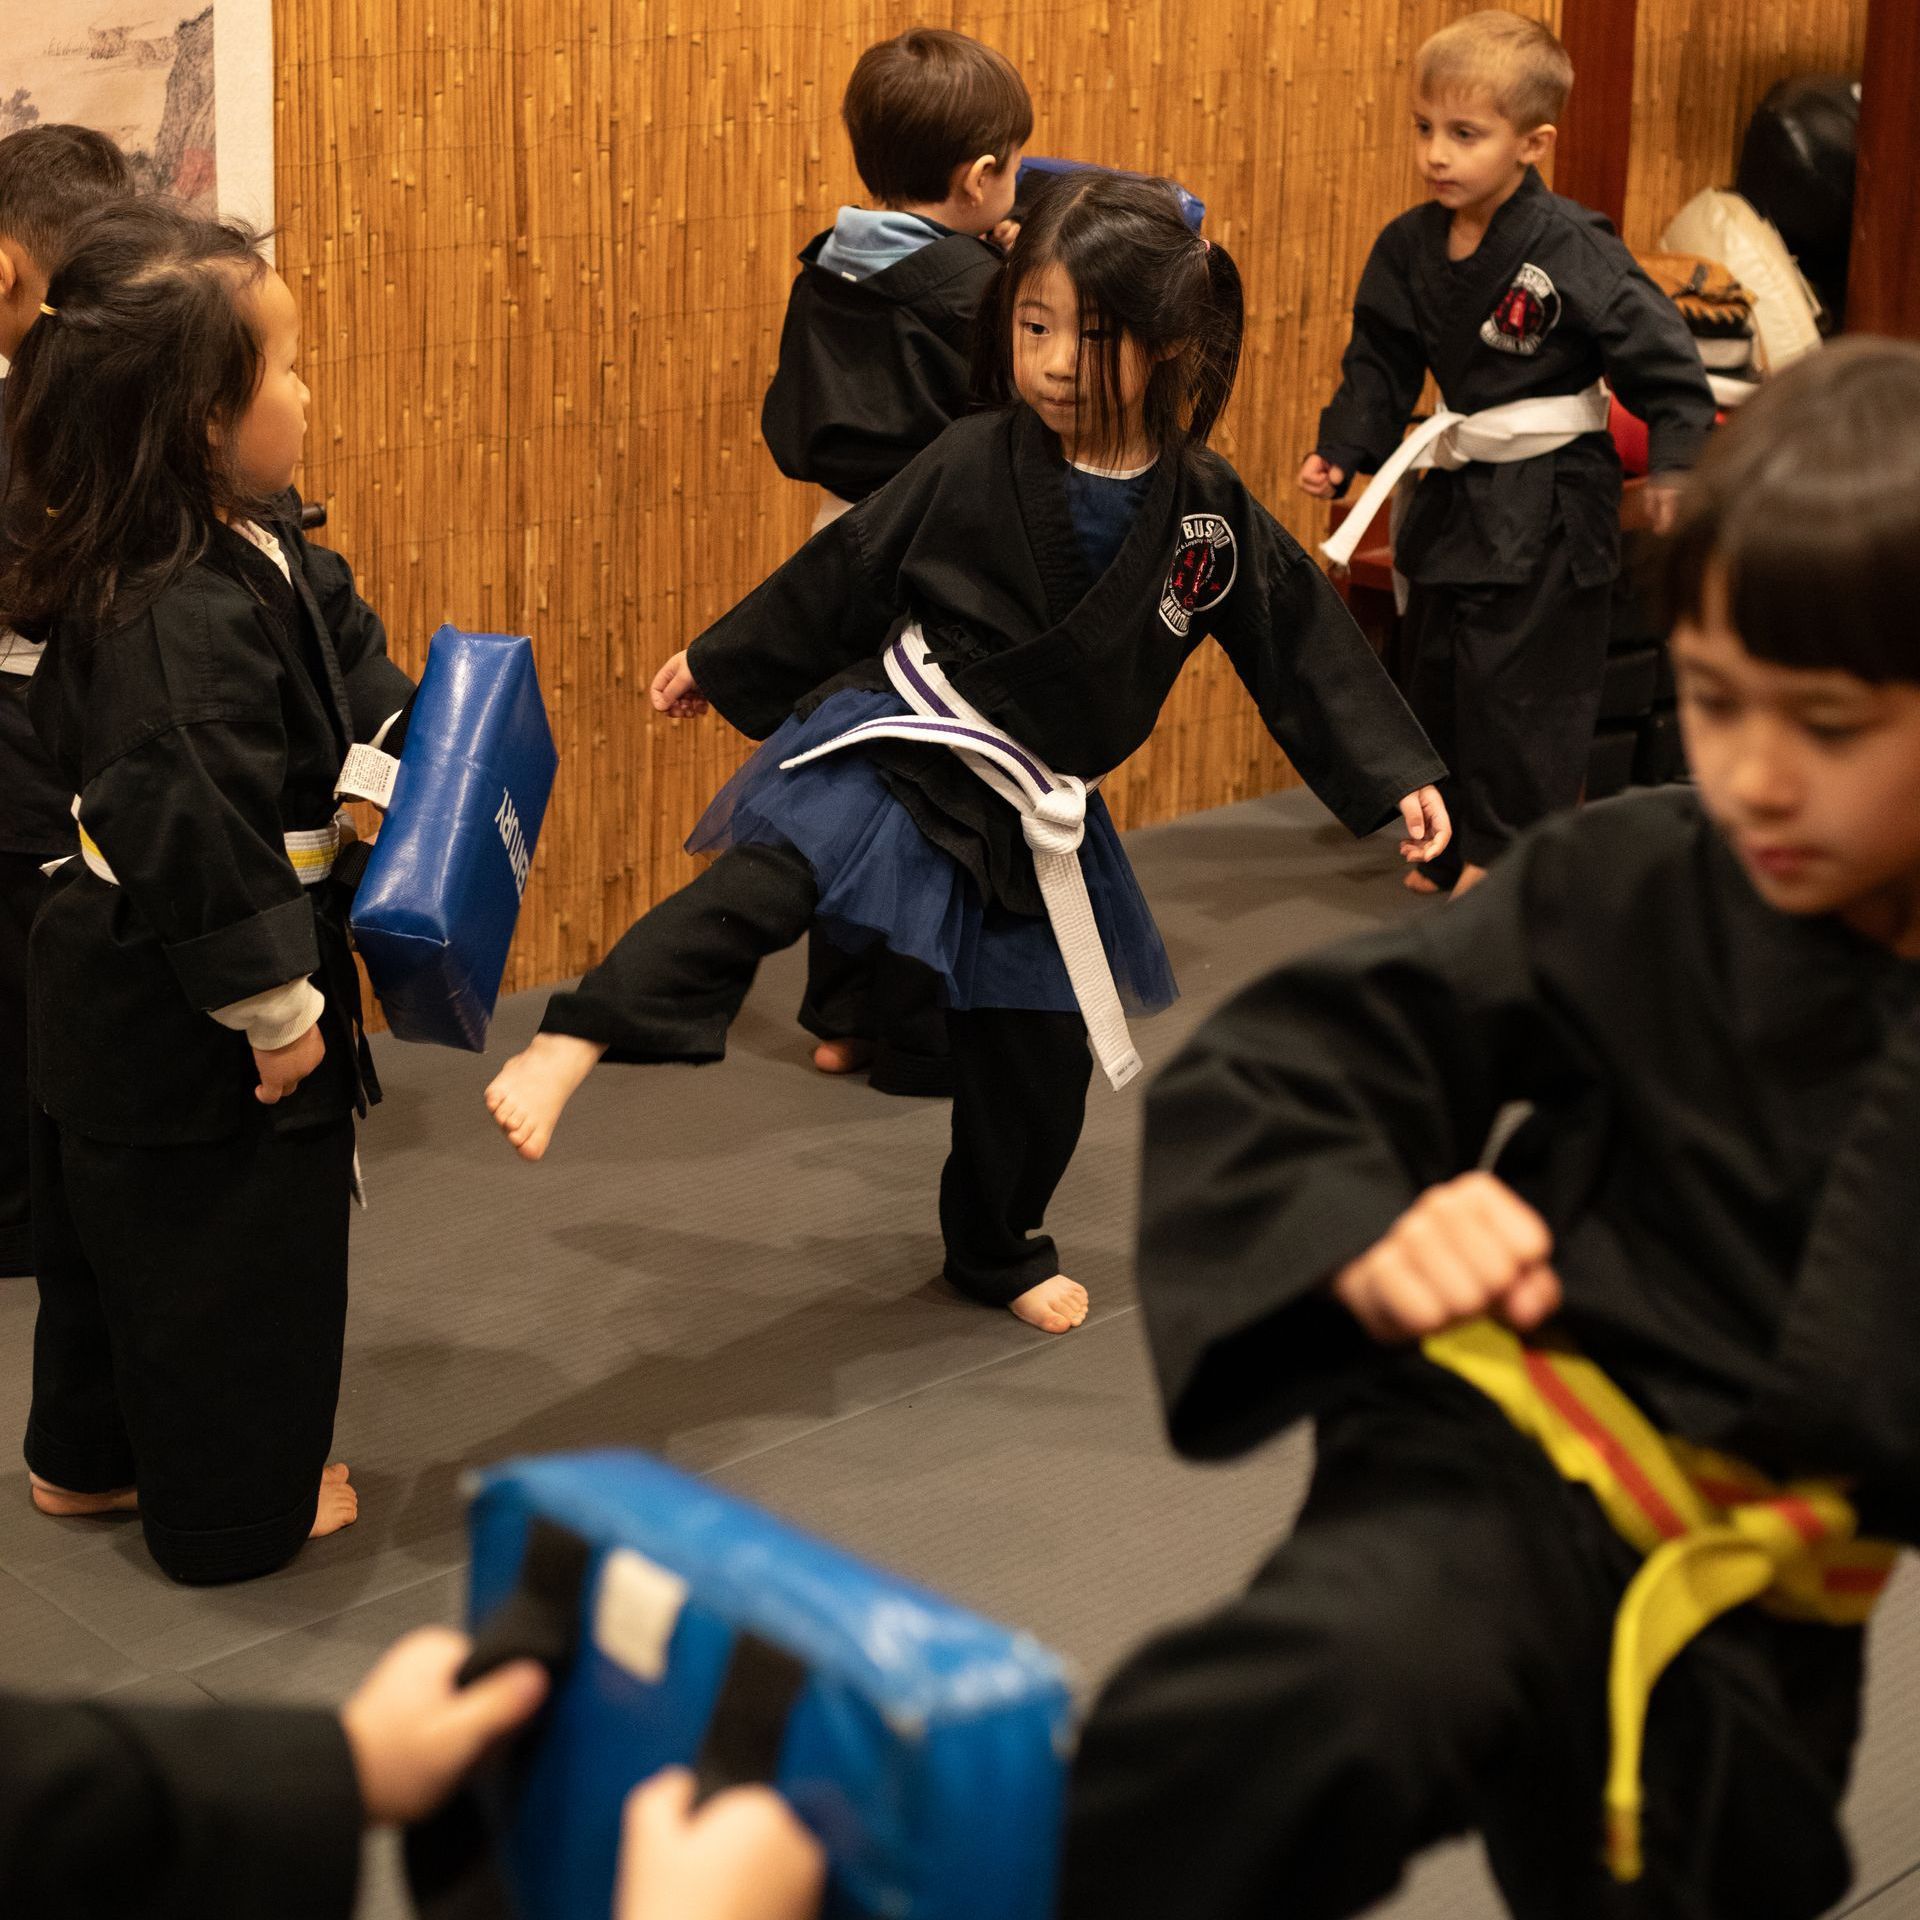 A group of children are practicing martial arts in a gym